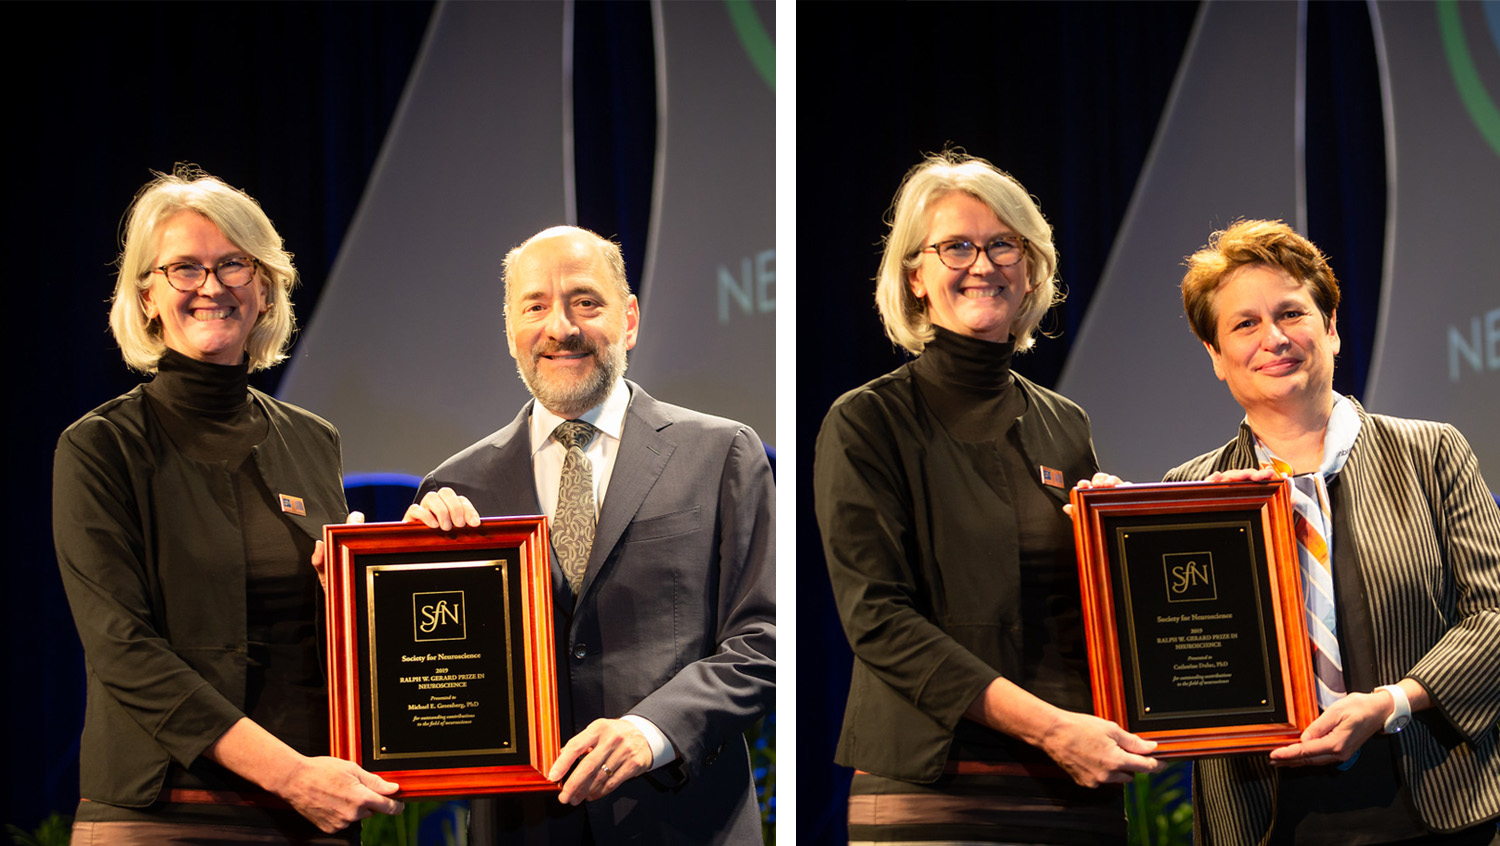 Michael E. Greenberg, PhD (left), of Harvard Medical School, and Catherine Dulac, PhD (right), of Harvard University are honored with the Ralph W. Gerard Prize in Neuroscience.